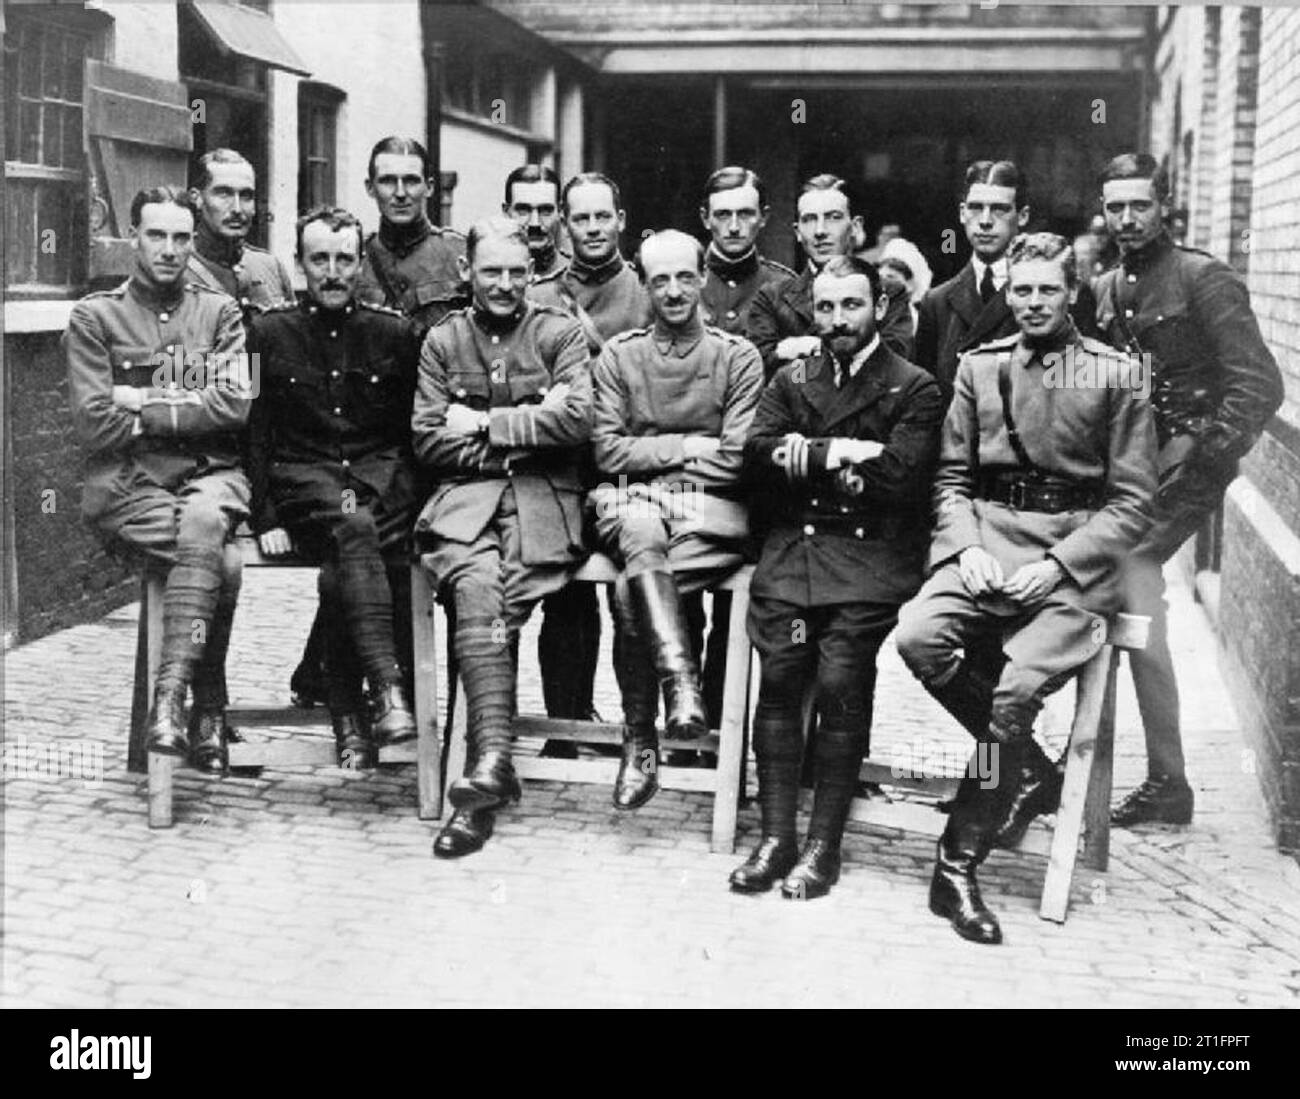 A group of officers of the Royal Flying Corps. These men were among the first flying and administrative officers of the RFC, and some of the first pilots ever qualified by the Royal Aero Club (RAeC certificate numbers and dates in parentheses).[1] Front row, seated (left to right) Lieutenant (later Captain) Geoffrey de Havilland (No. 53, 7/2/1911)[1]:118 Captain (later Air Commodore) Robert Gordon, R.M.[2] (No. 166, 6/12/1911)[1]:113 Major (later Air Chief Marshal) Robert Brooke-Popham (No. 108, 18/7/1911)[1]:148 Major (later Major-General) Frederick Sykes, first Officer Commanding the Militar Stock Photo